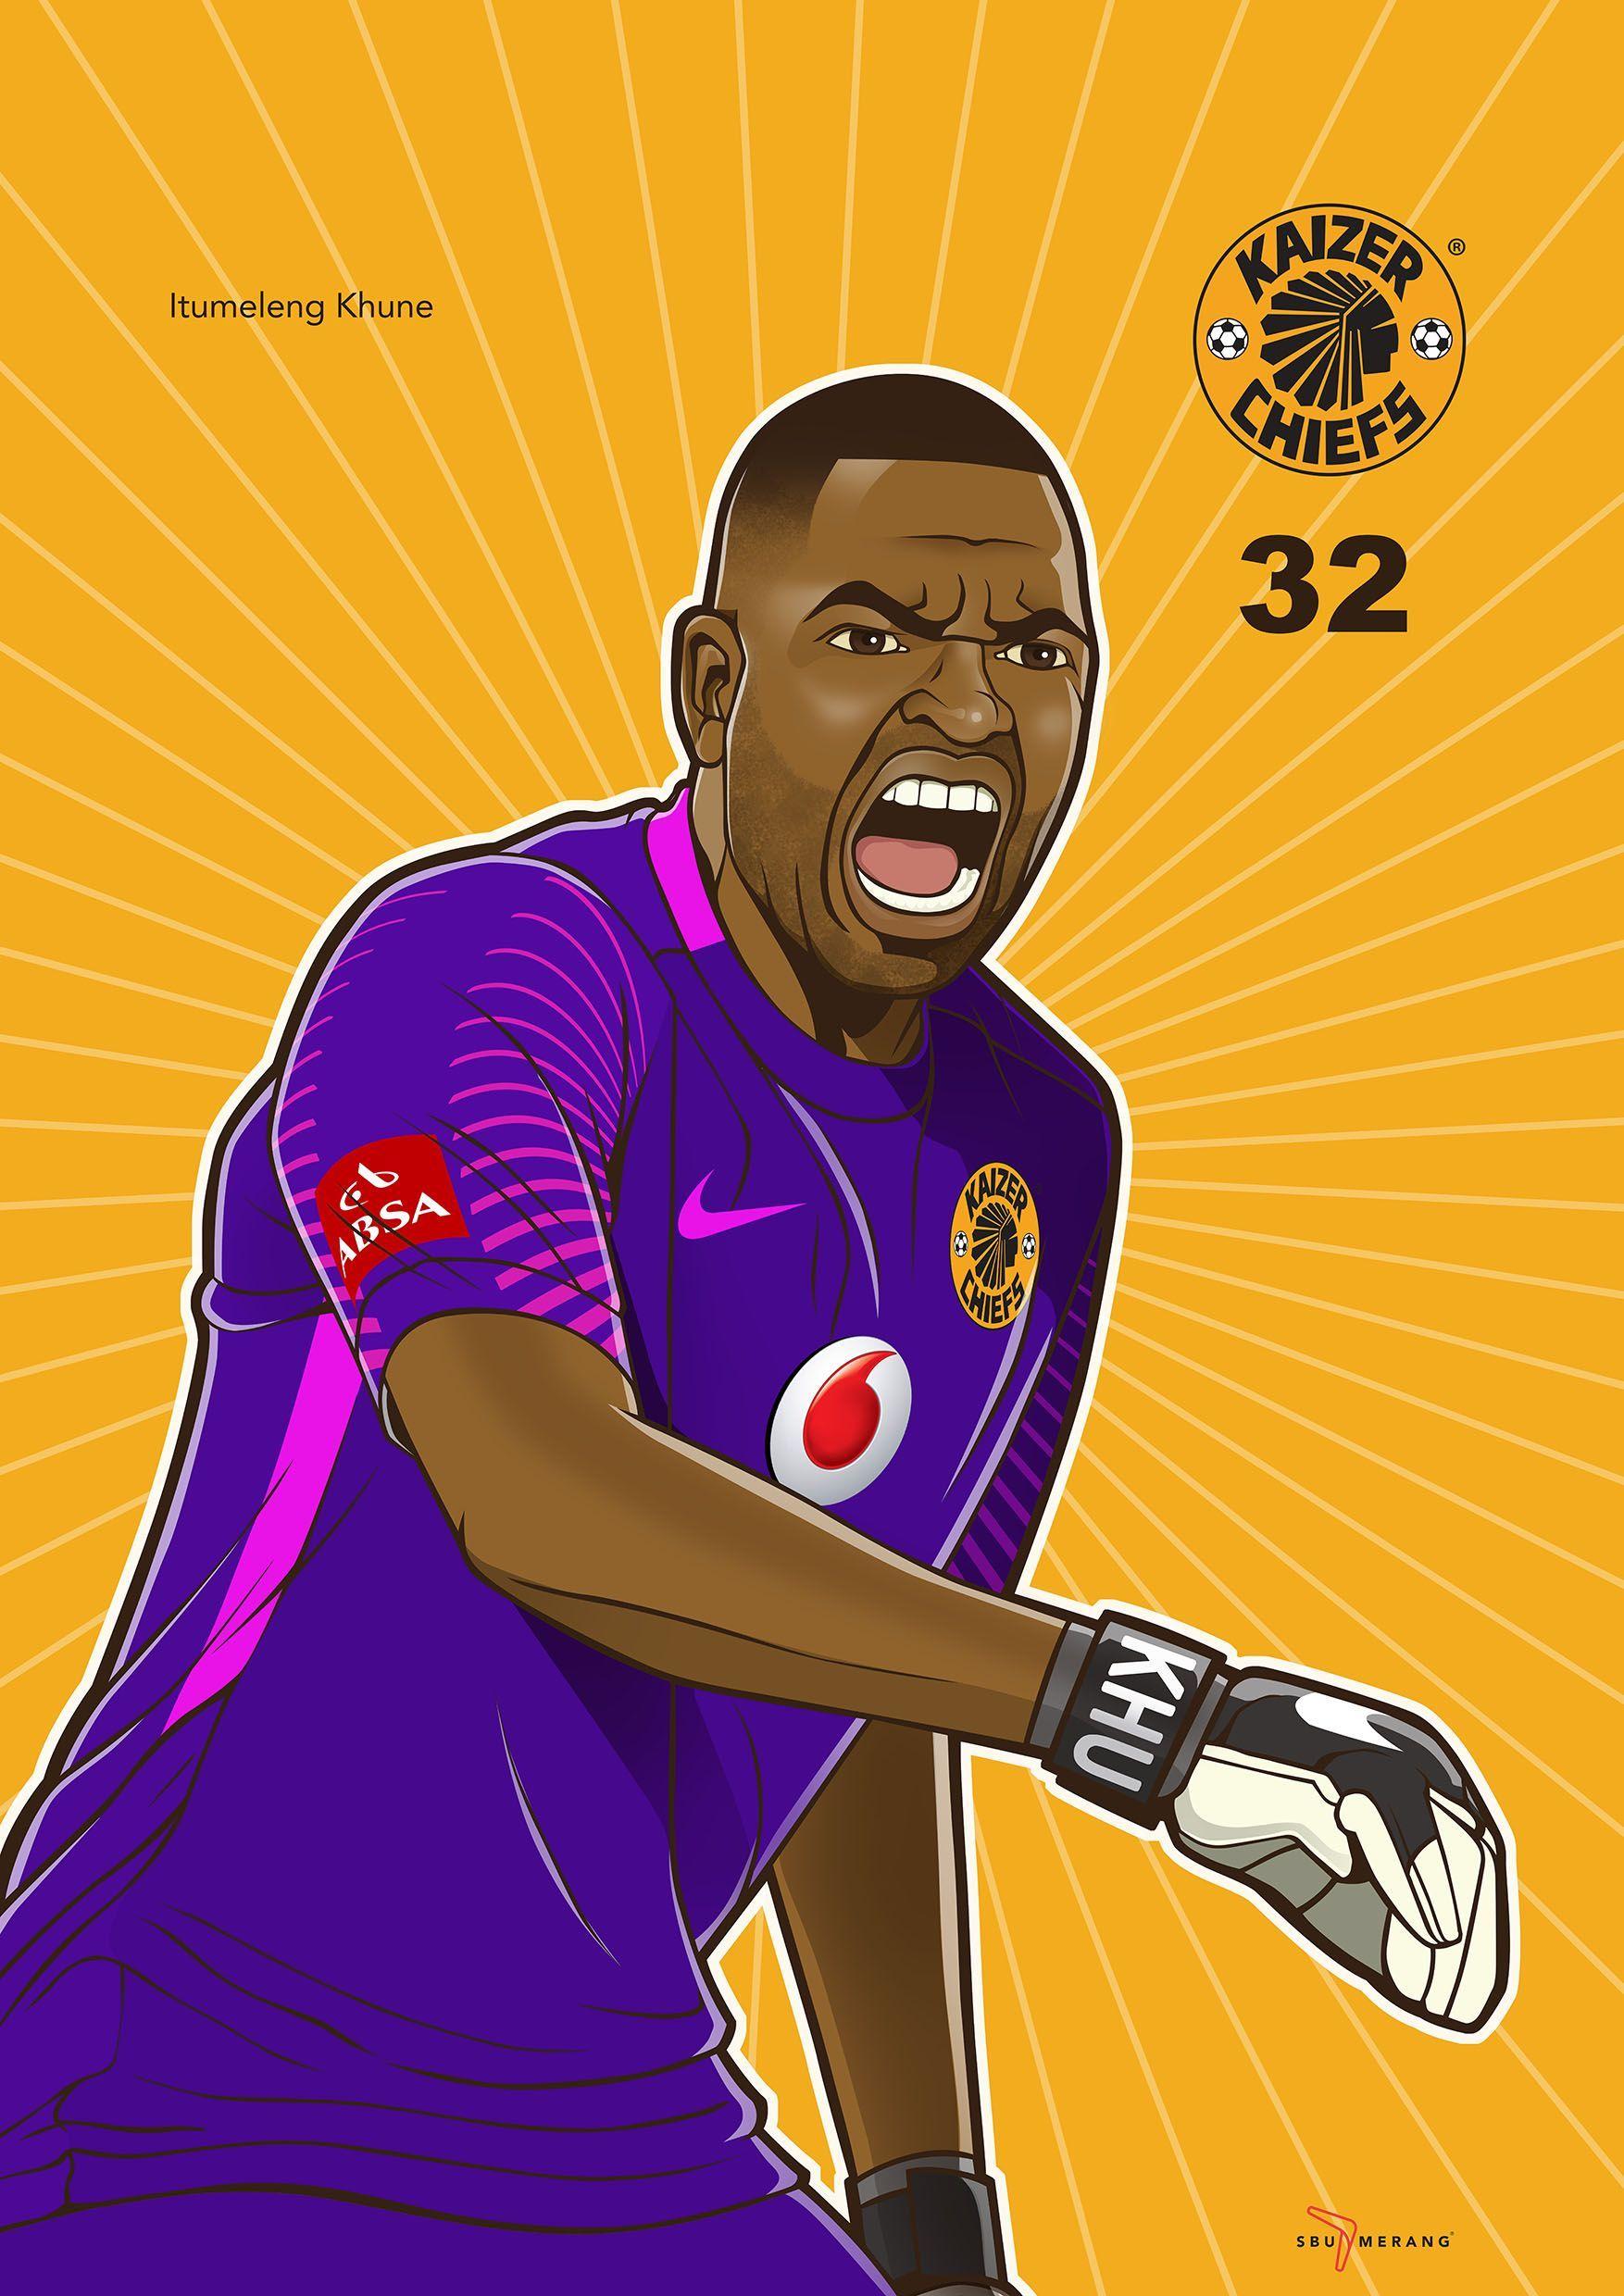 Iwisa Kaizer Chiefs Players_Poster Collection_Itumeleng Khune. Best